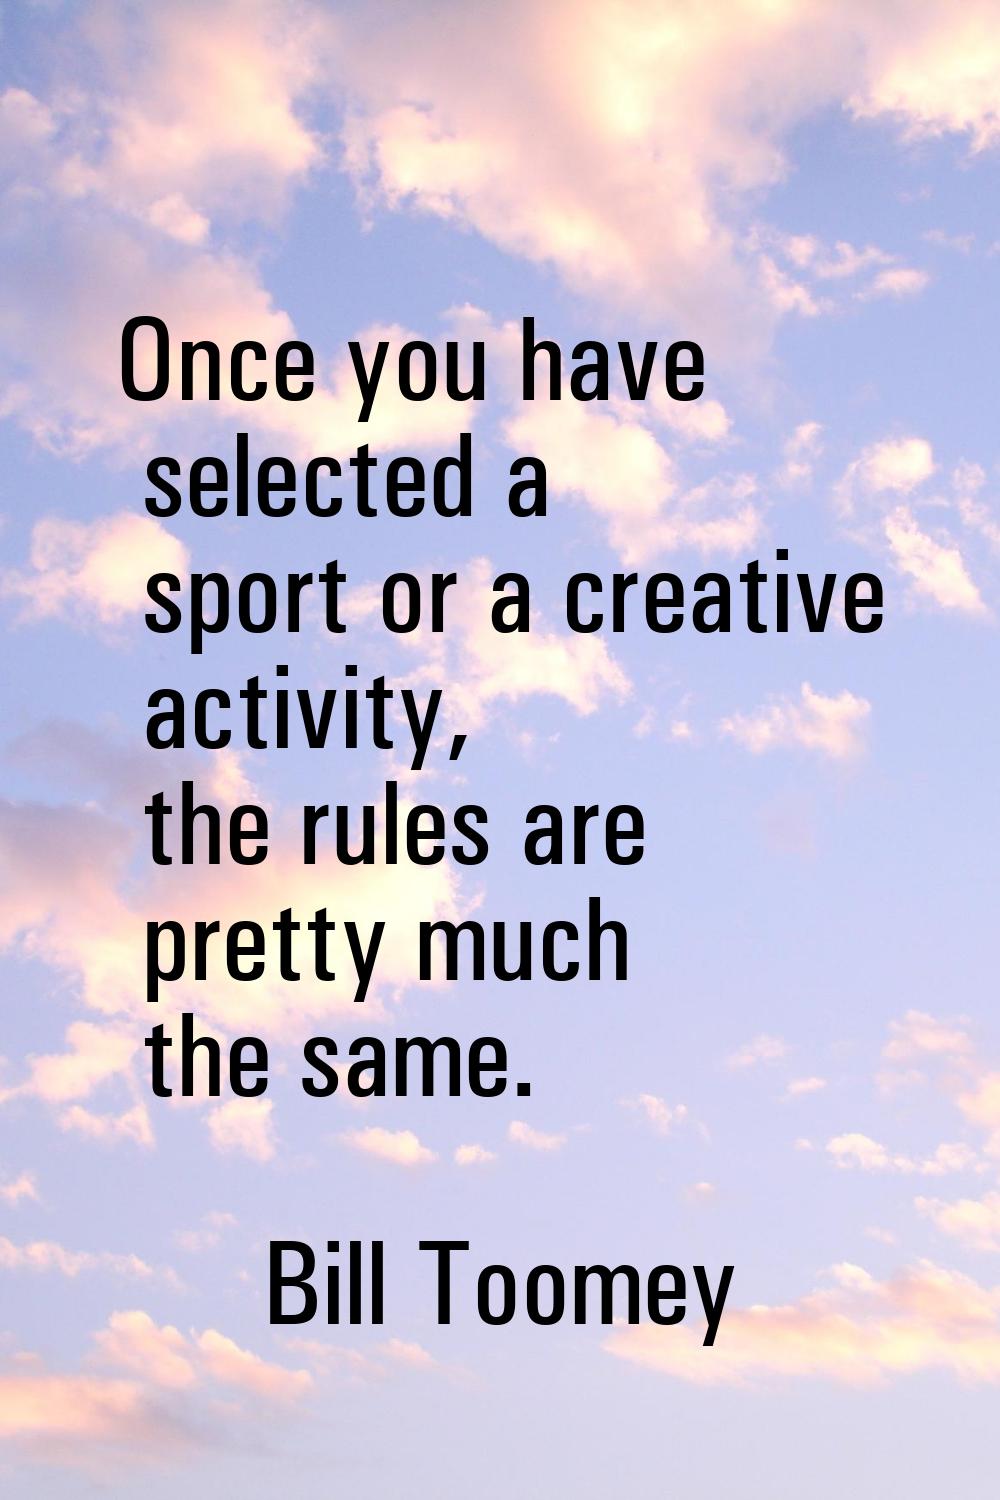 Once you have selected a sport or a creative activity, the rules are pretty much the same.